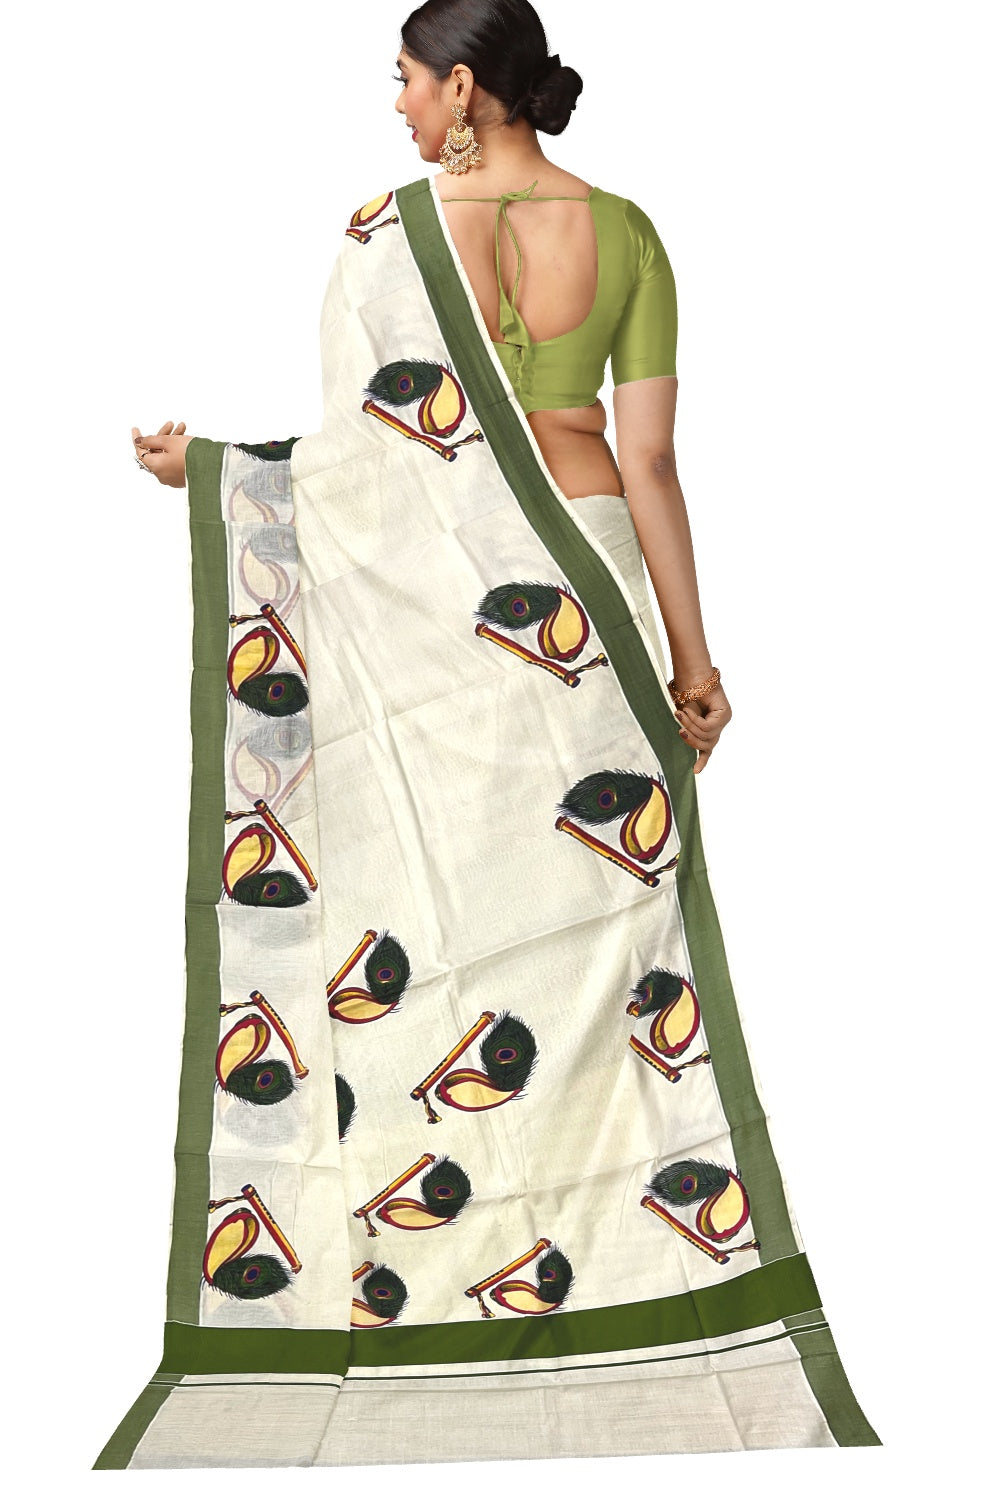 Kerala Pure Cotton Green Border Saree with Feather and Shell Mural Printed Design